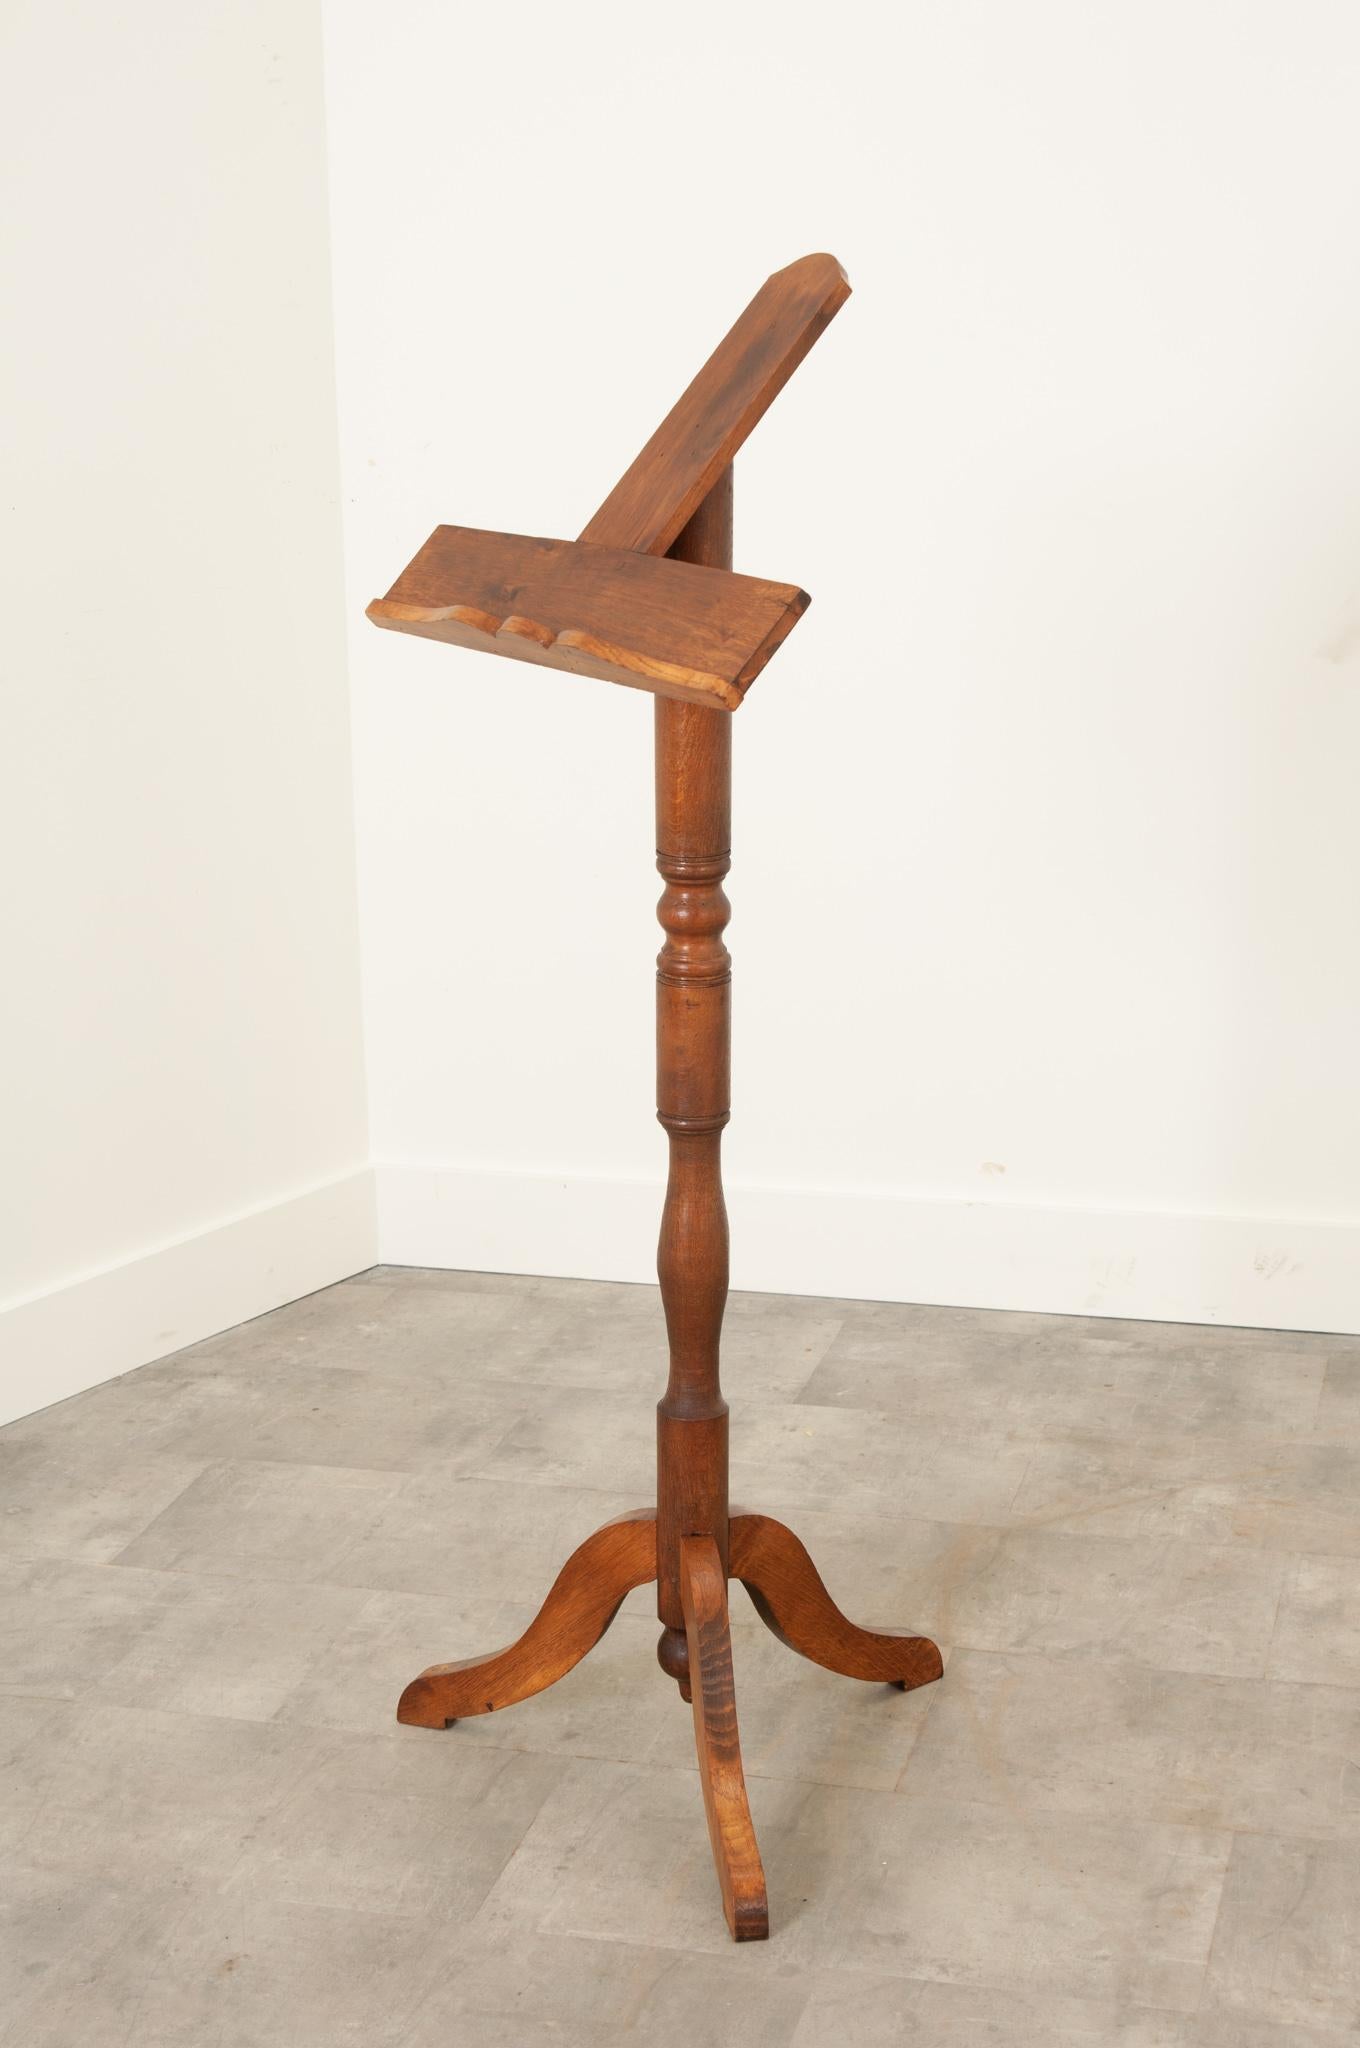 A wonderful music or book stand, made in France towards the end of the 19th century. The uncomplicated design is a testament to turned wood, with its post made of solid oak, which has been turned in a classic balustraded form. The oak has been